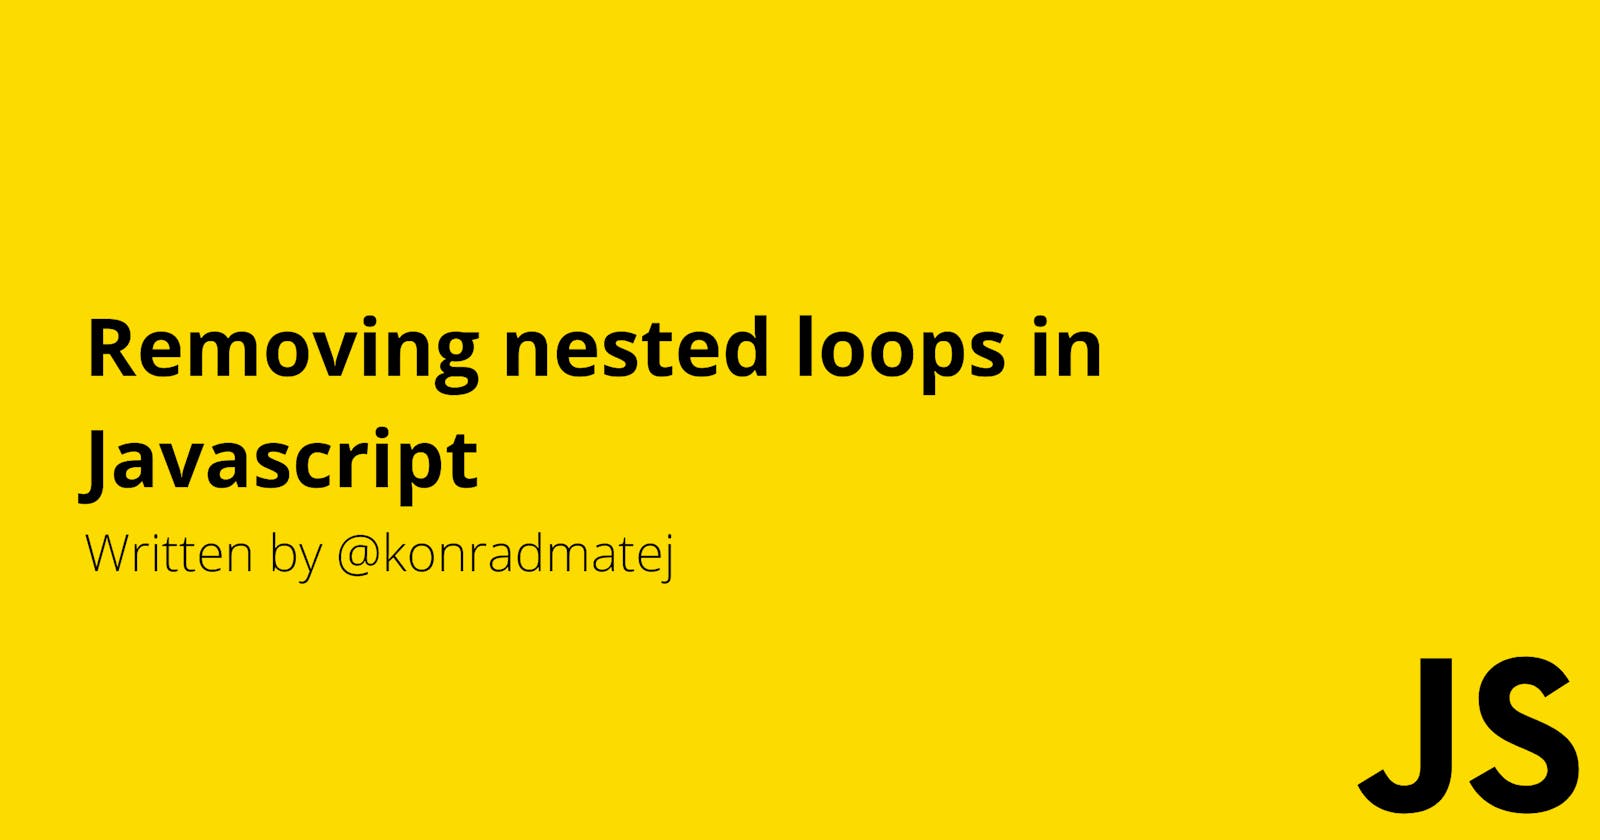 Removing nested loops in Javascript